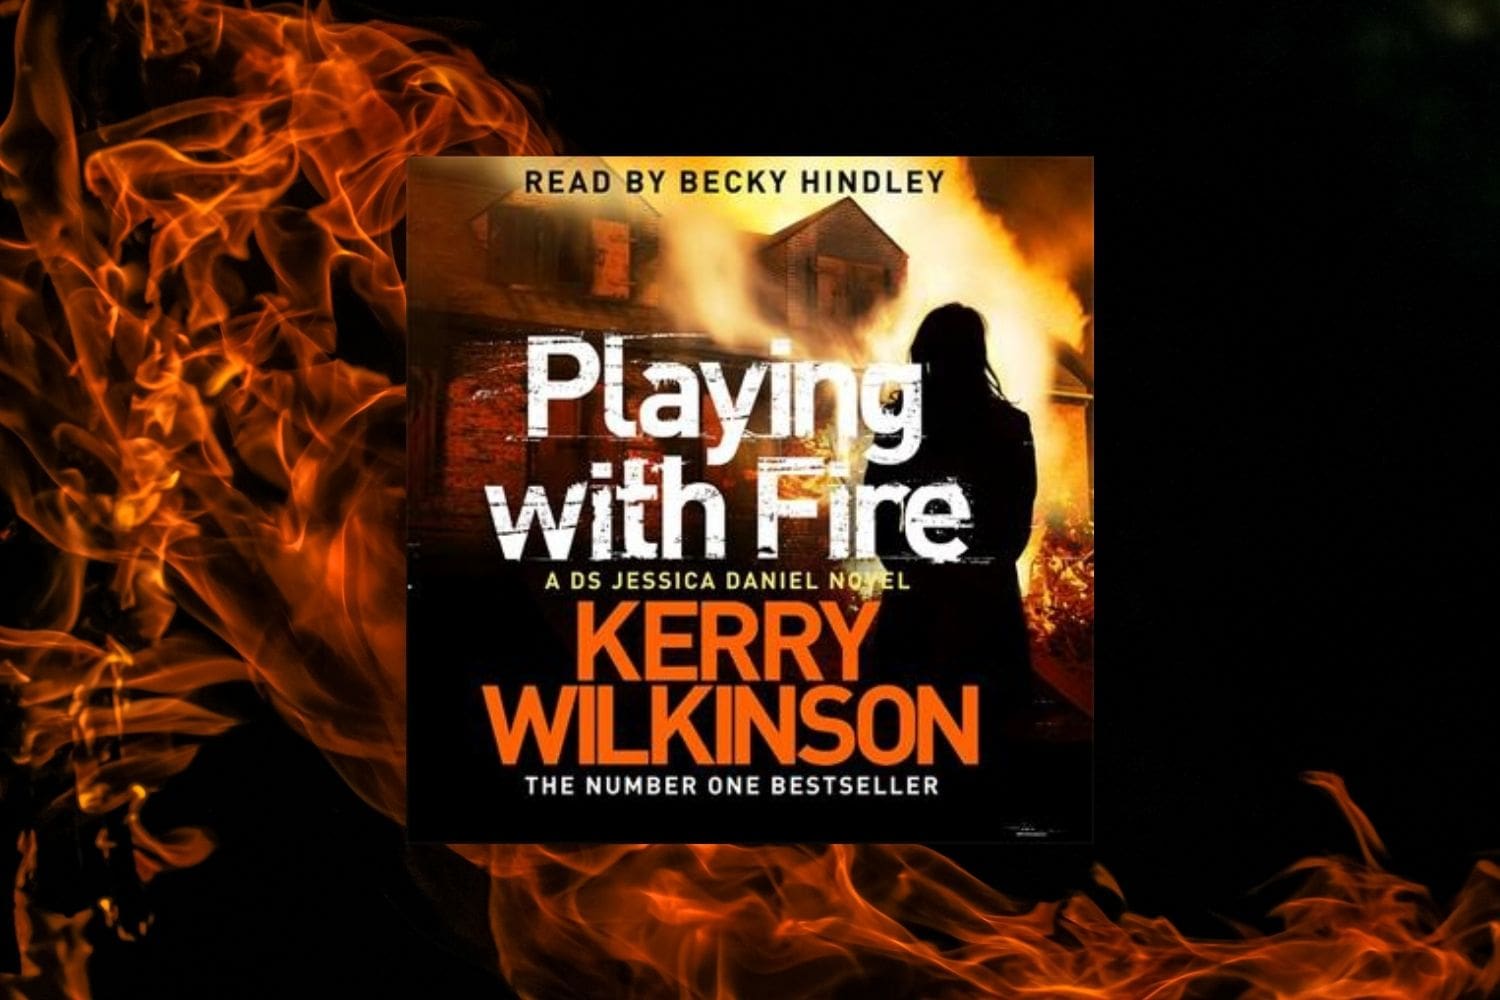 Playing With Fire by Kerry Wilkinson audiobook cover 